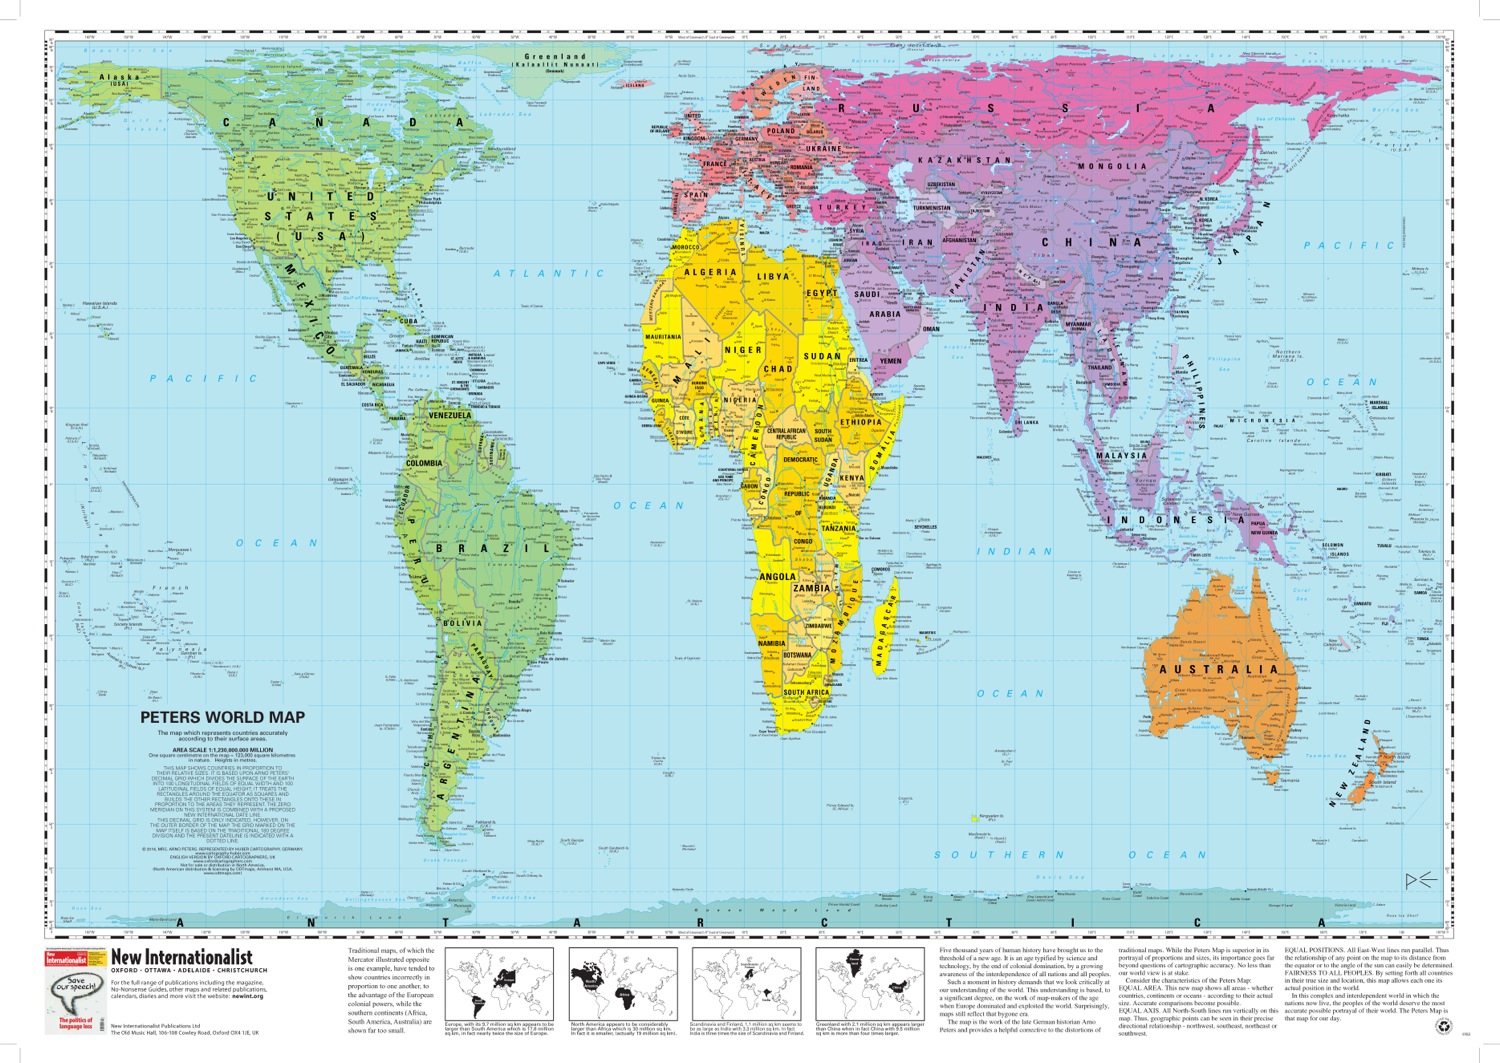 Peters Projection Map, Widely used in educational and business circles